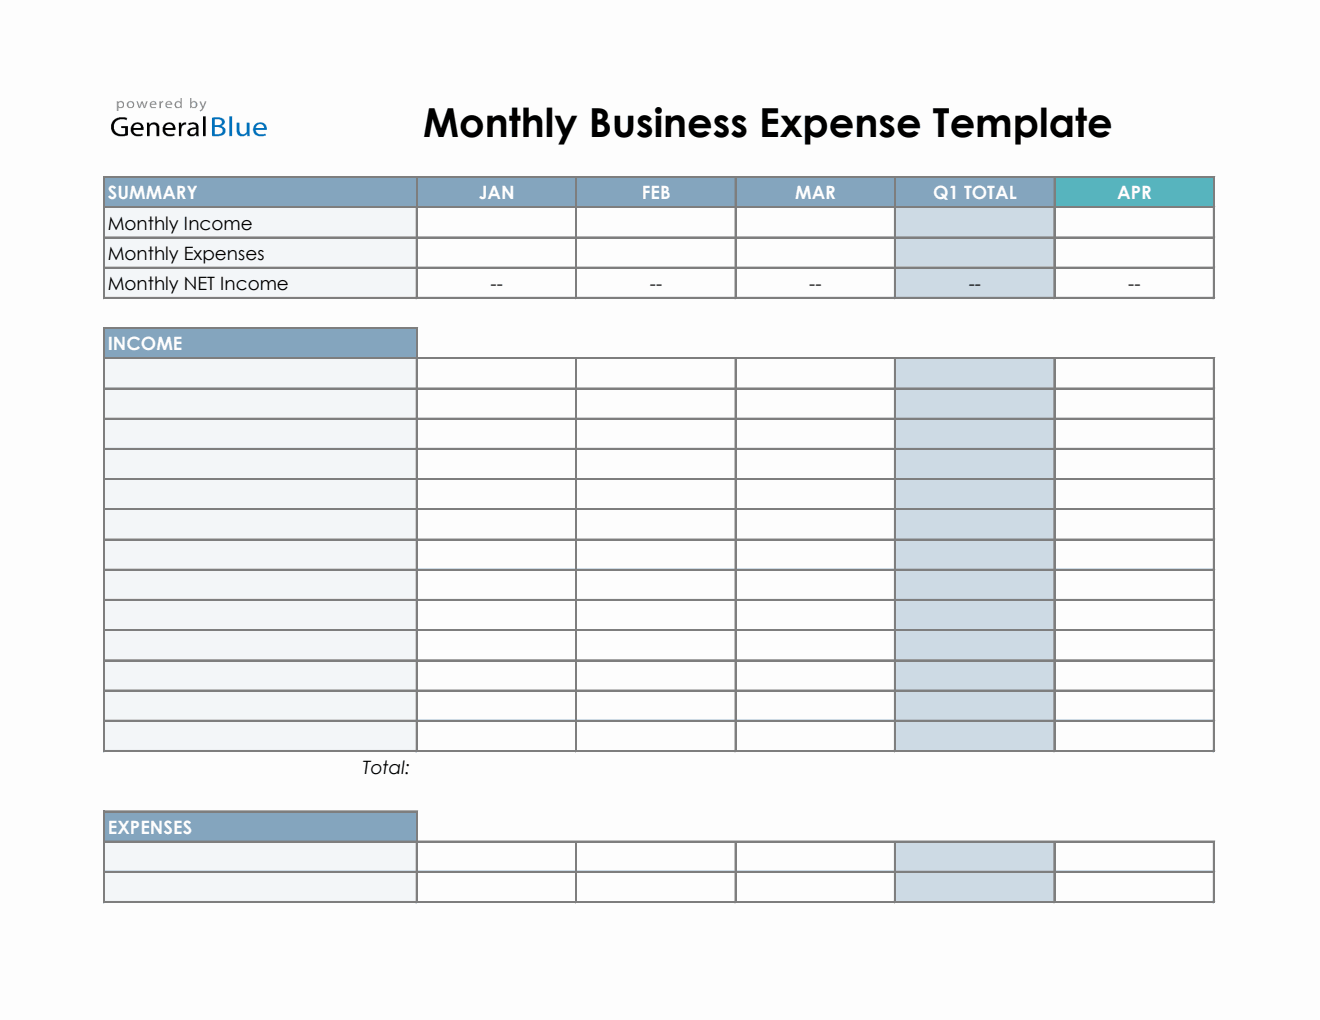 Monthly Business Expense Template in Excel